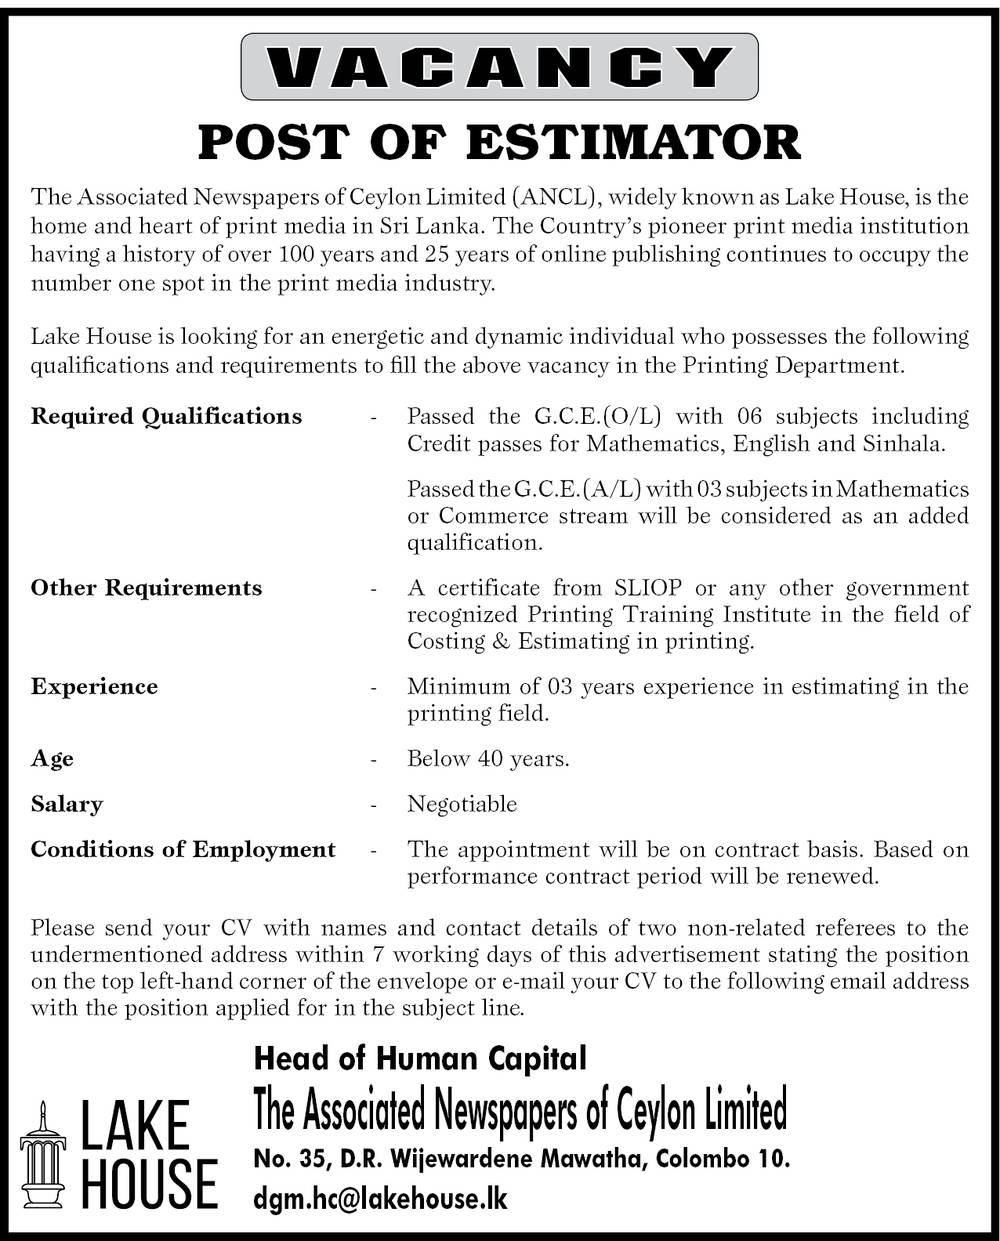 Estimator - The Associated Newspapers of Ceylon Limited